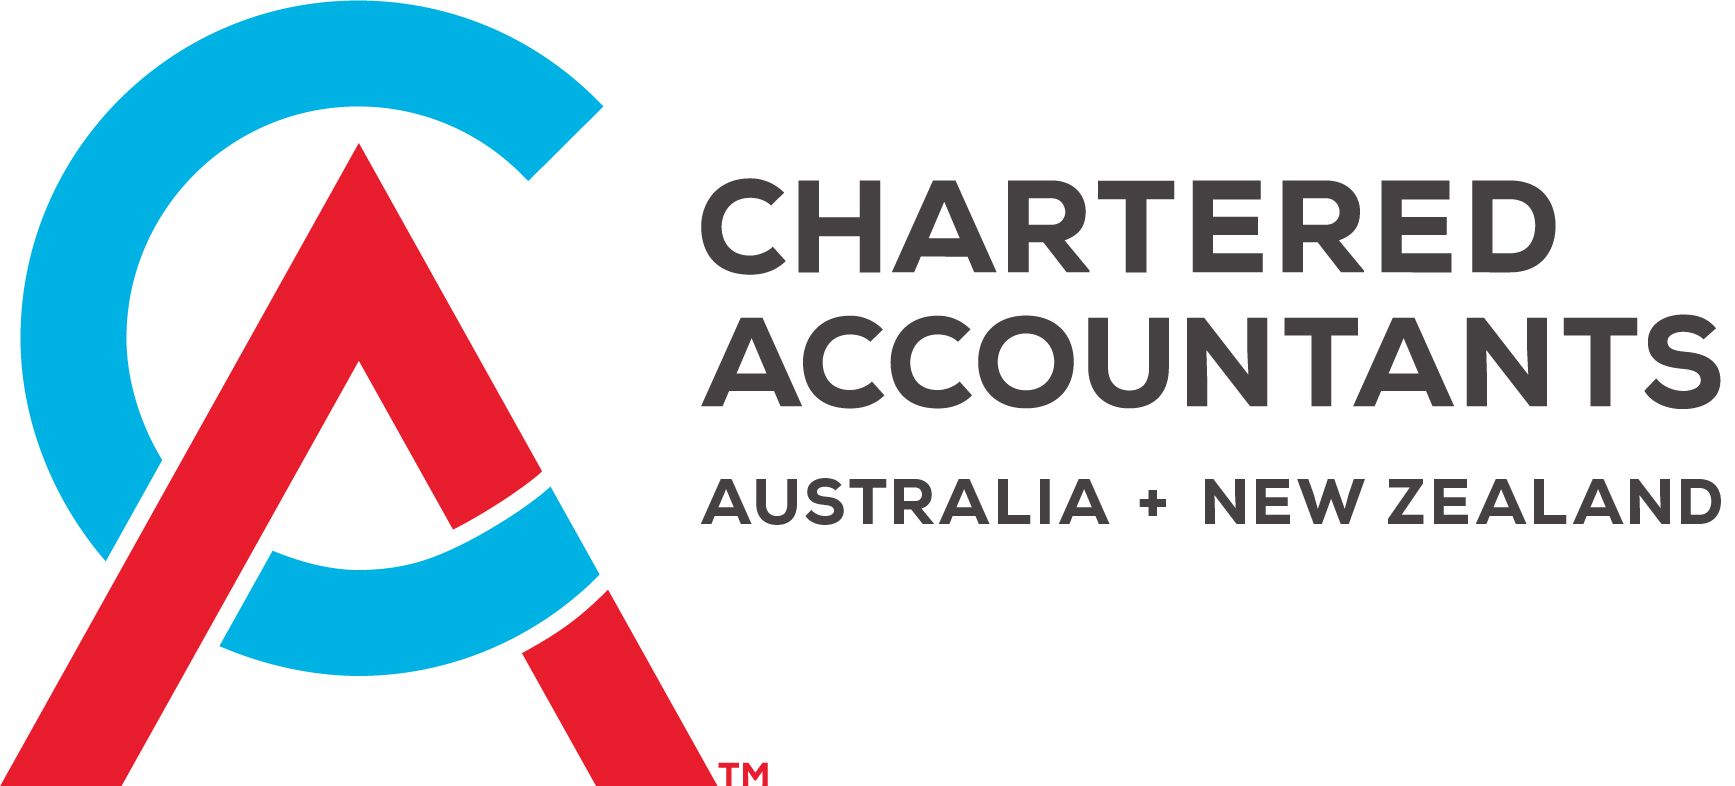 The logo for chartered accountants australia and new zealand.